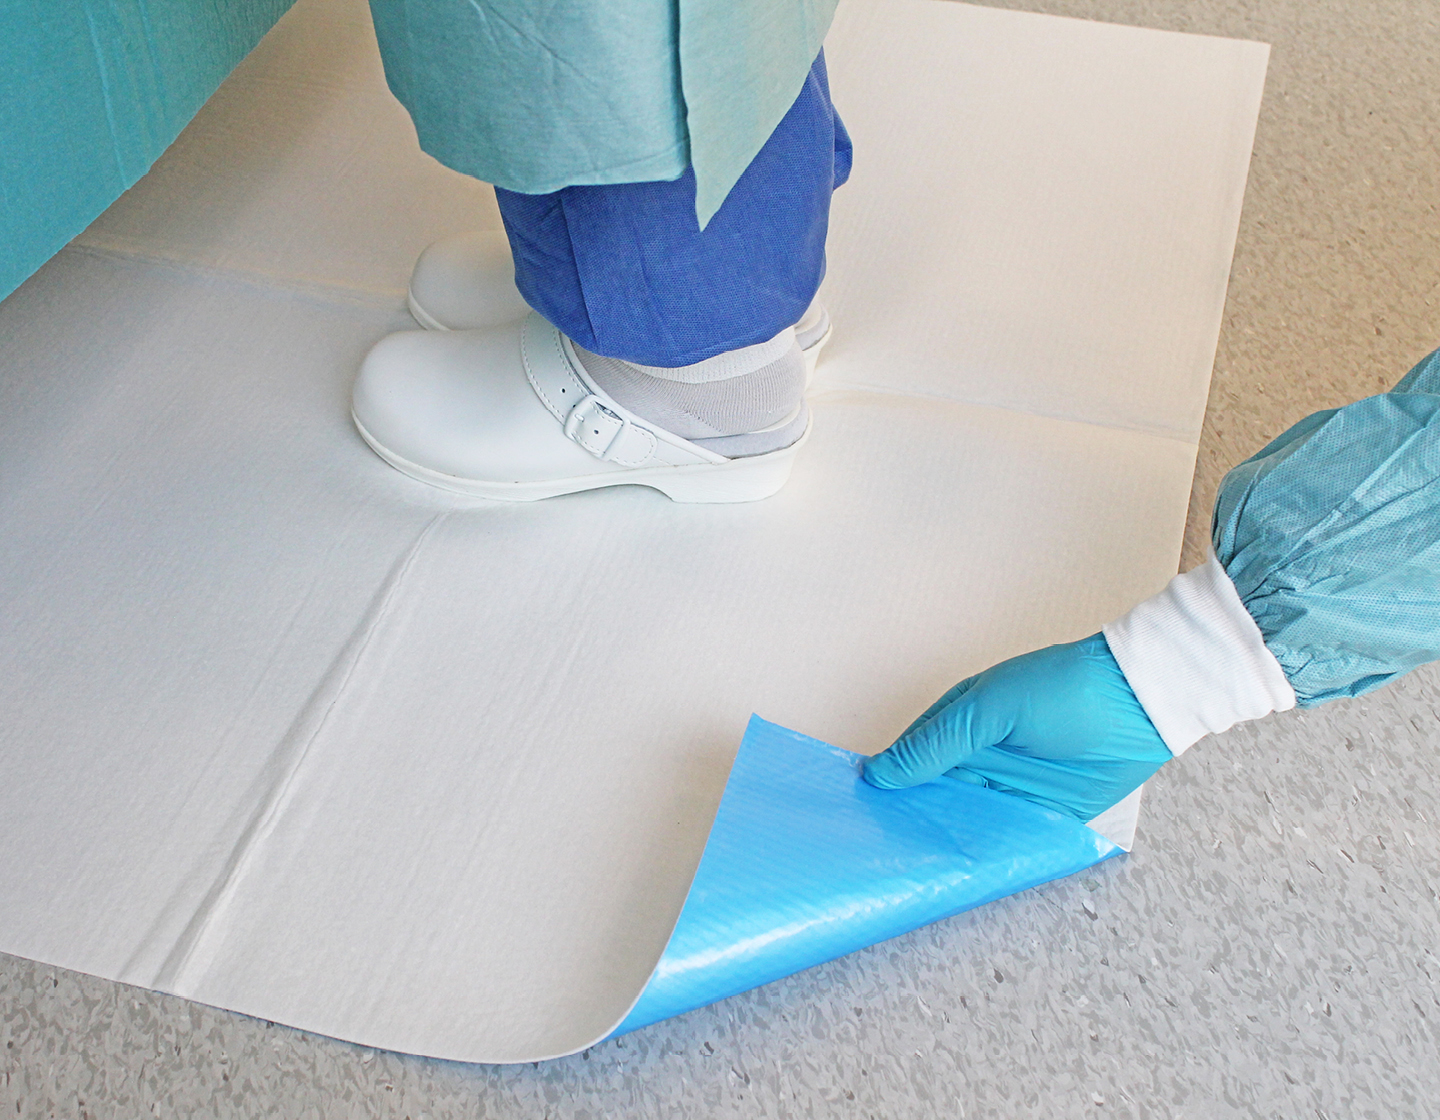 Absorbest Drymax XL floor mat, a fluid management solution for health care environments.